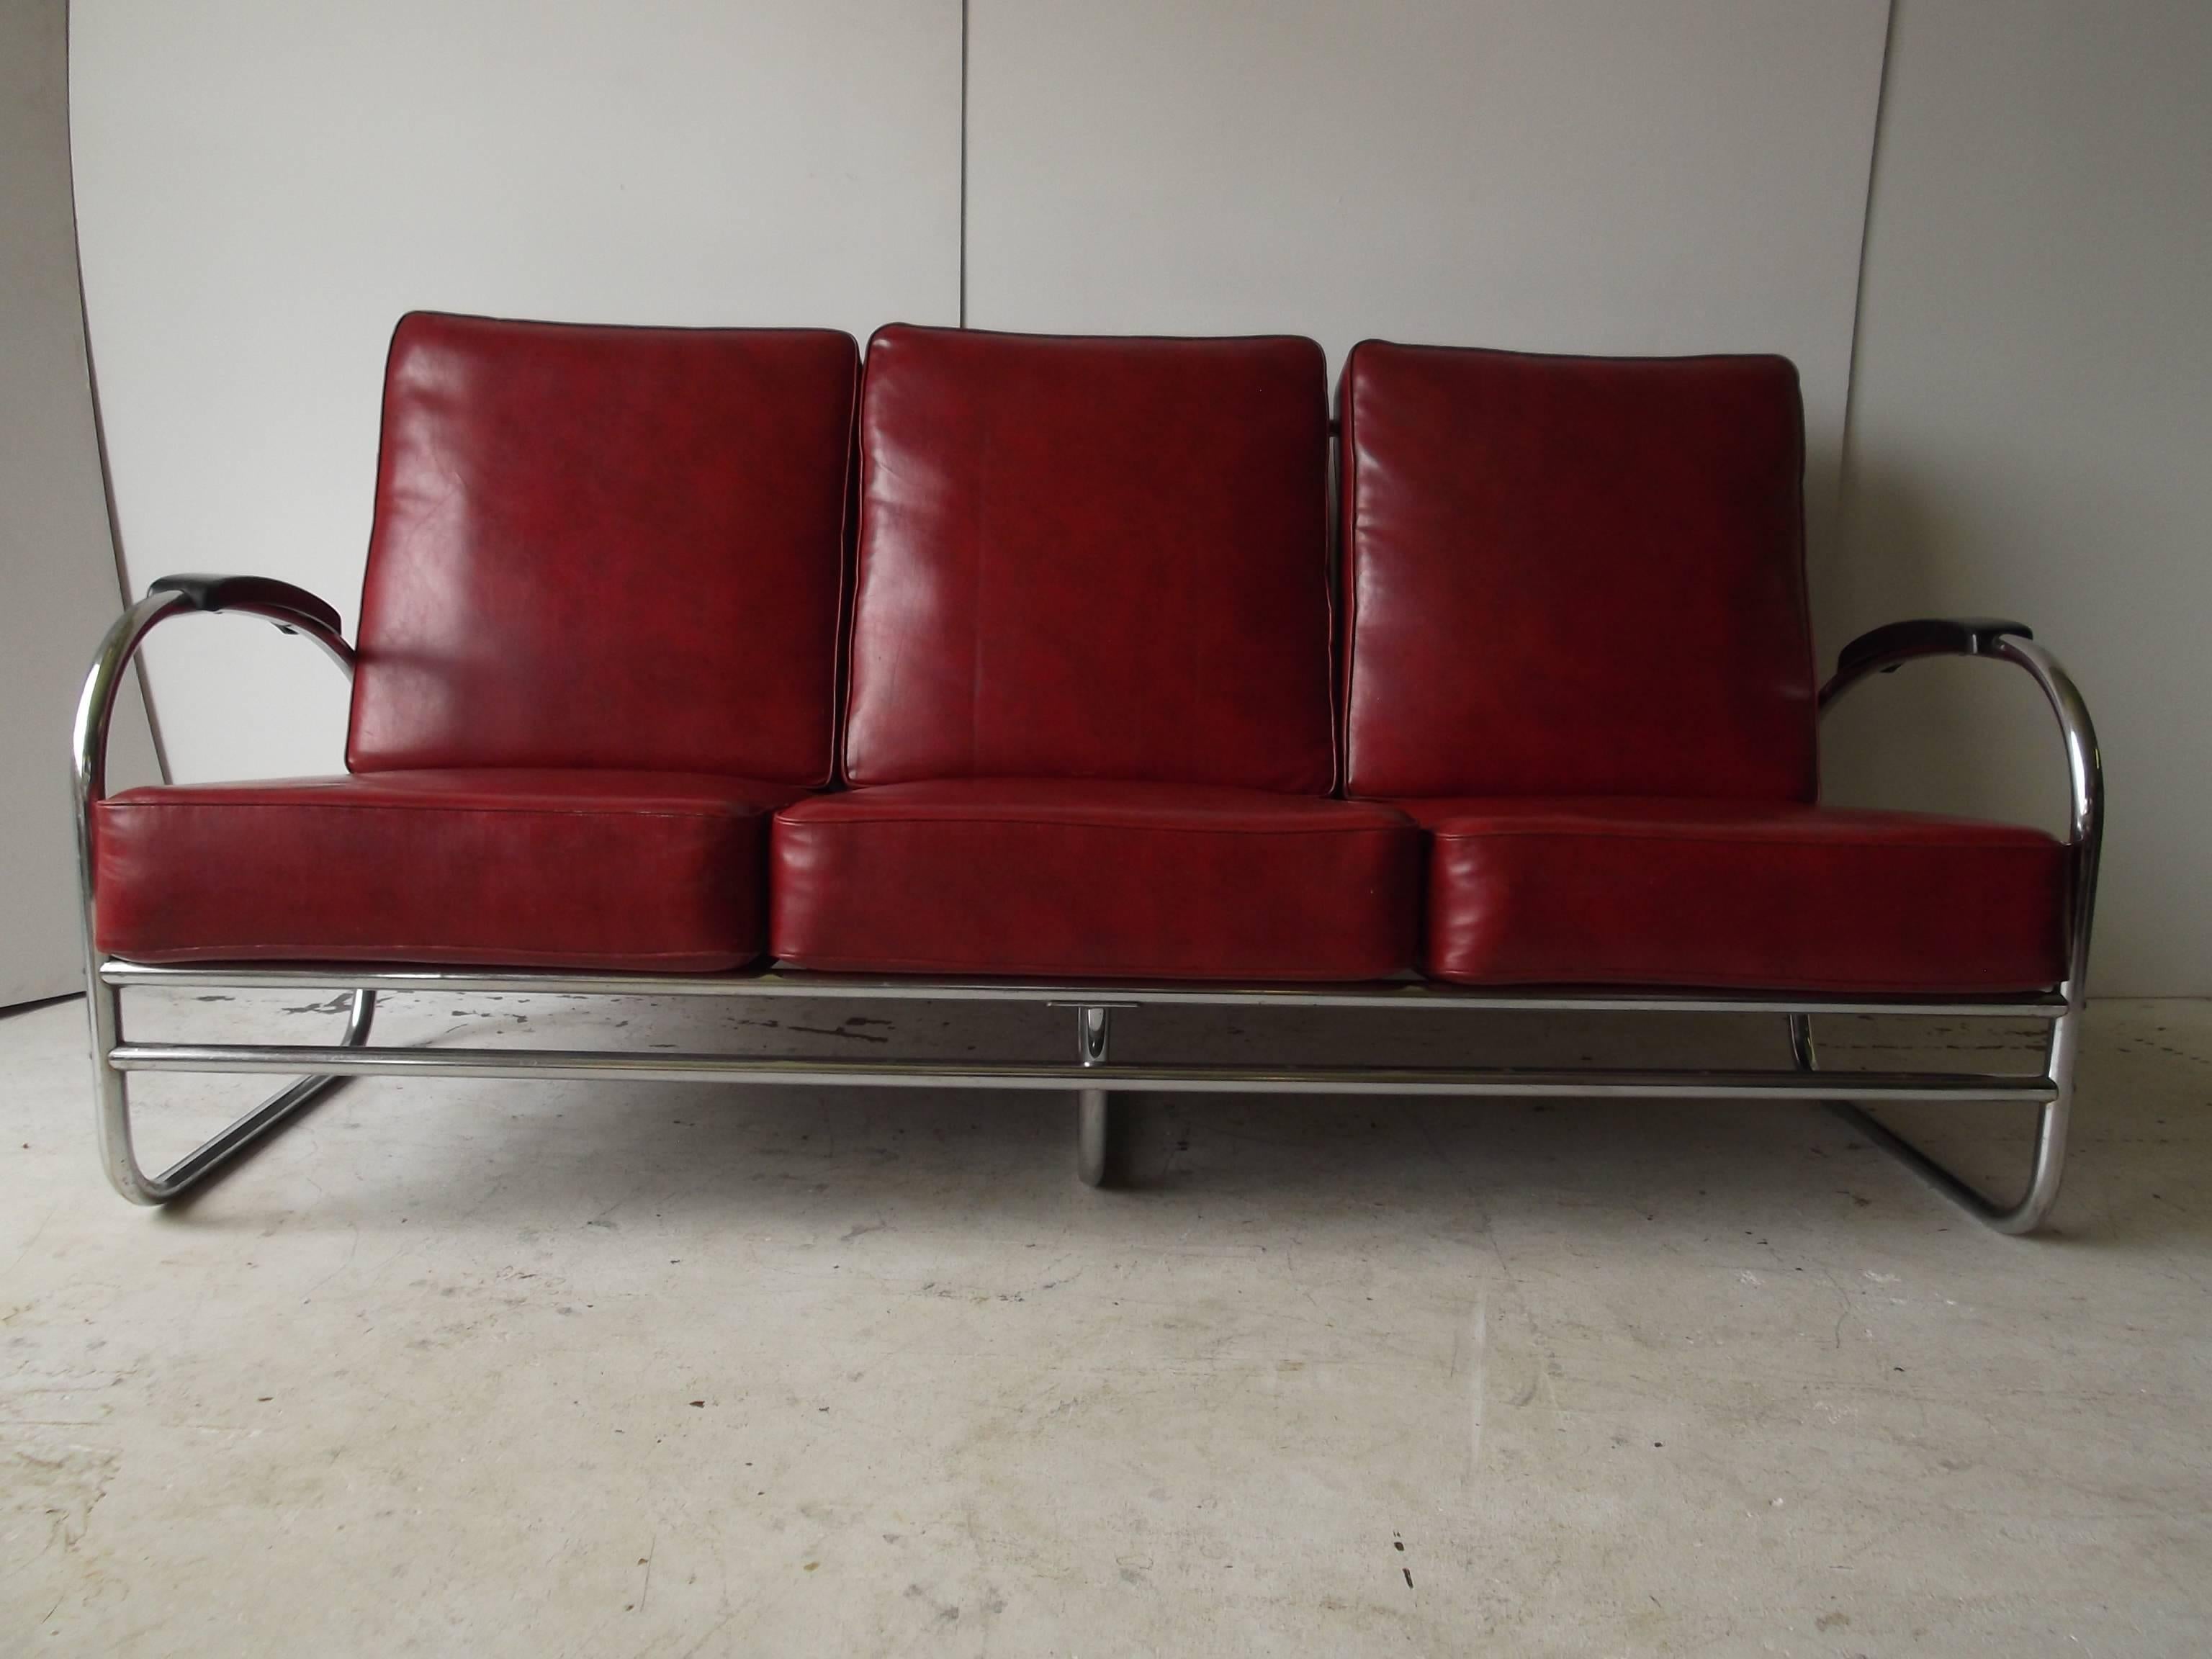 This is a very nice example of a period Art Deco design sofa for Royal Metal, see label. It retains its Original Vinyl cushions in a red color. There are no tears to fabric. The bakelite armrests are not chipped! The chrome is showing signs of rust